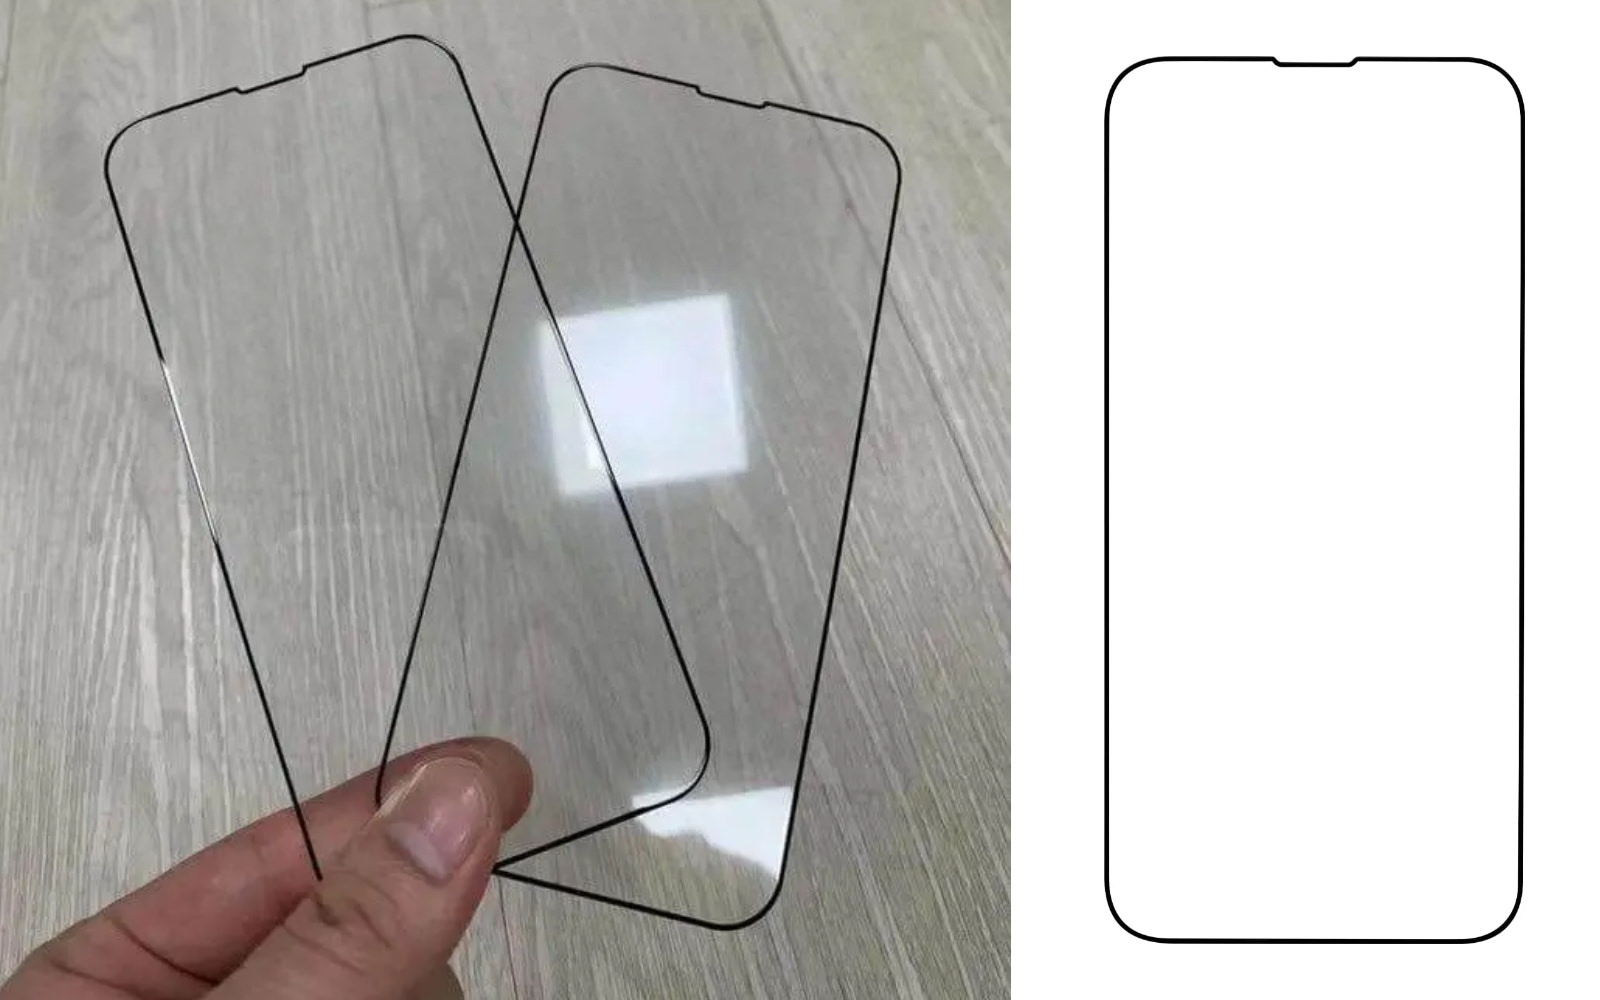 Is this the cover glass for iphonese4